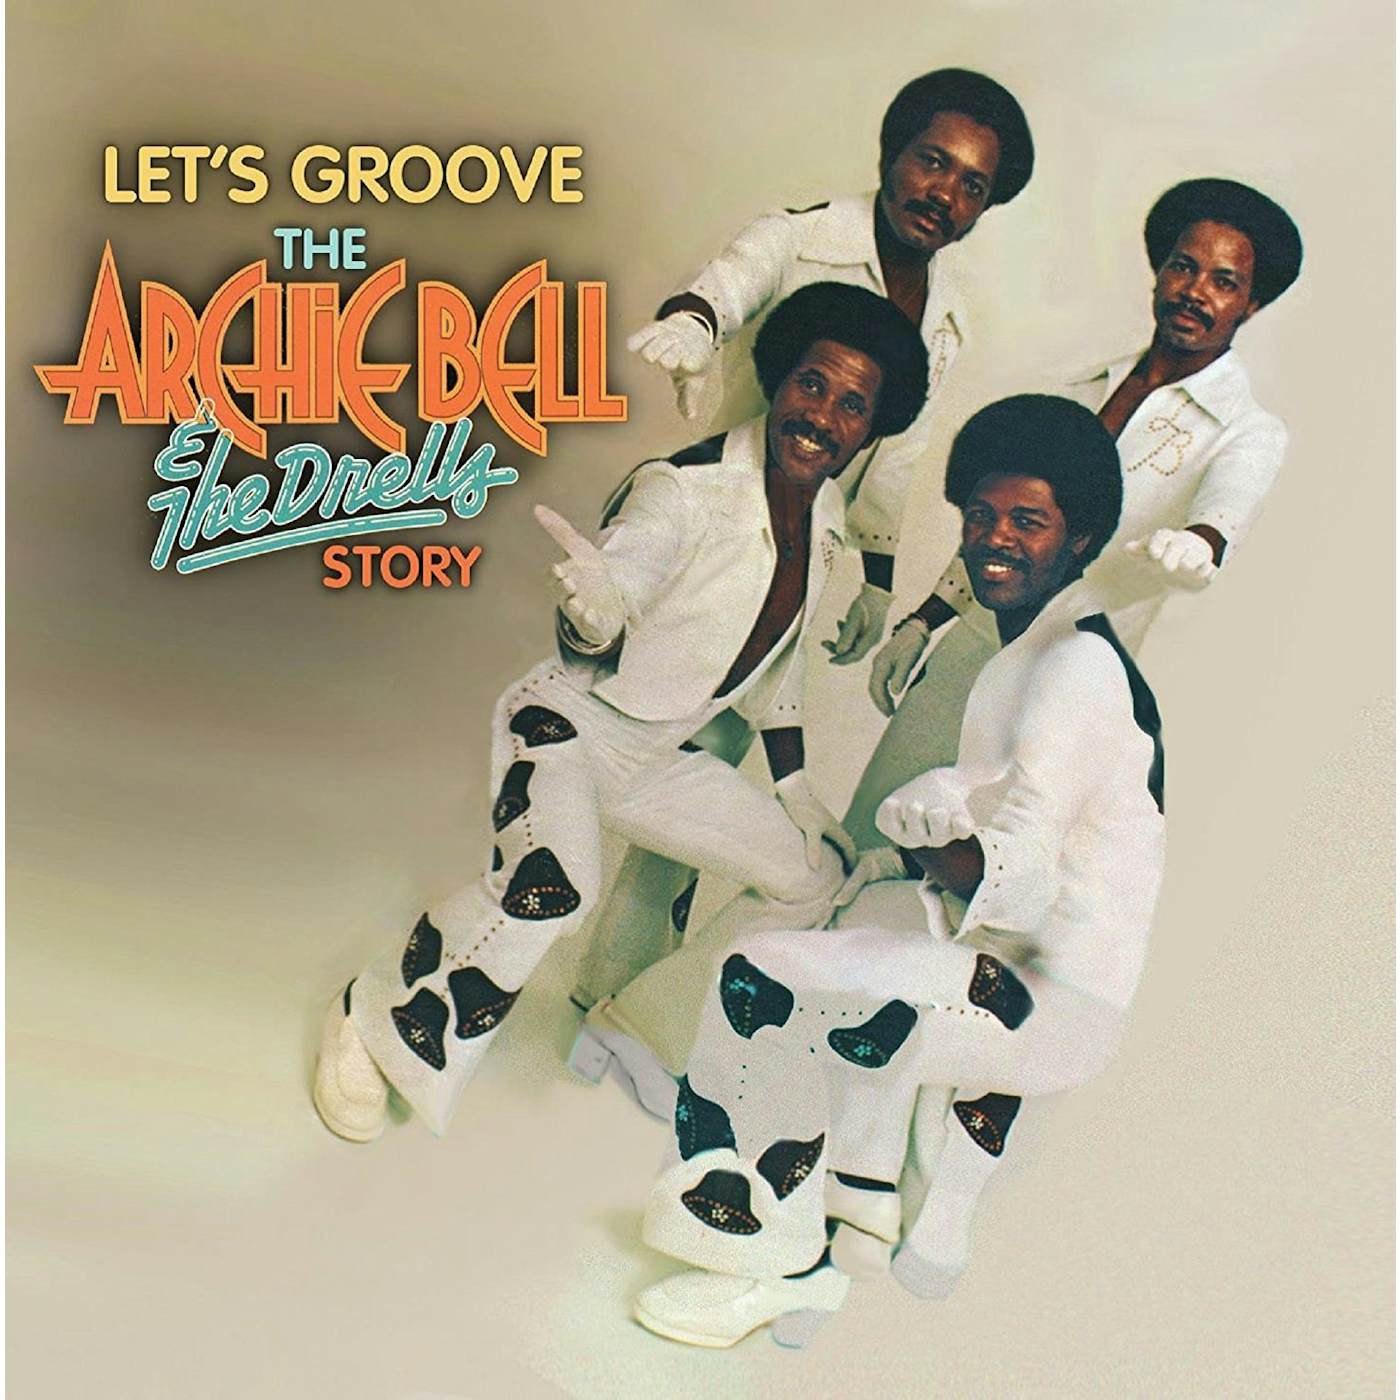 LET'S GROOVE: ARCHIE BELL & THE DRELLS STORY 50TH CD